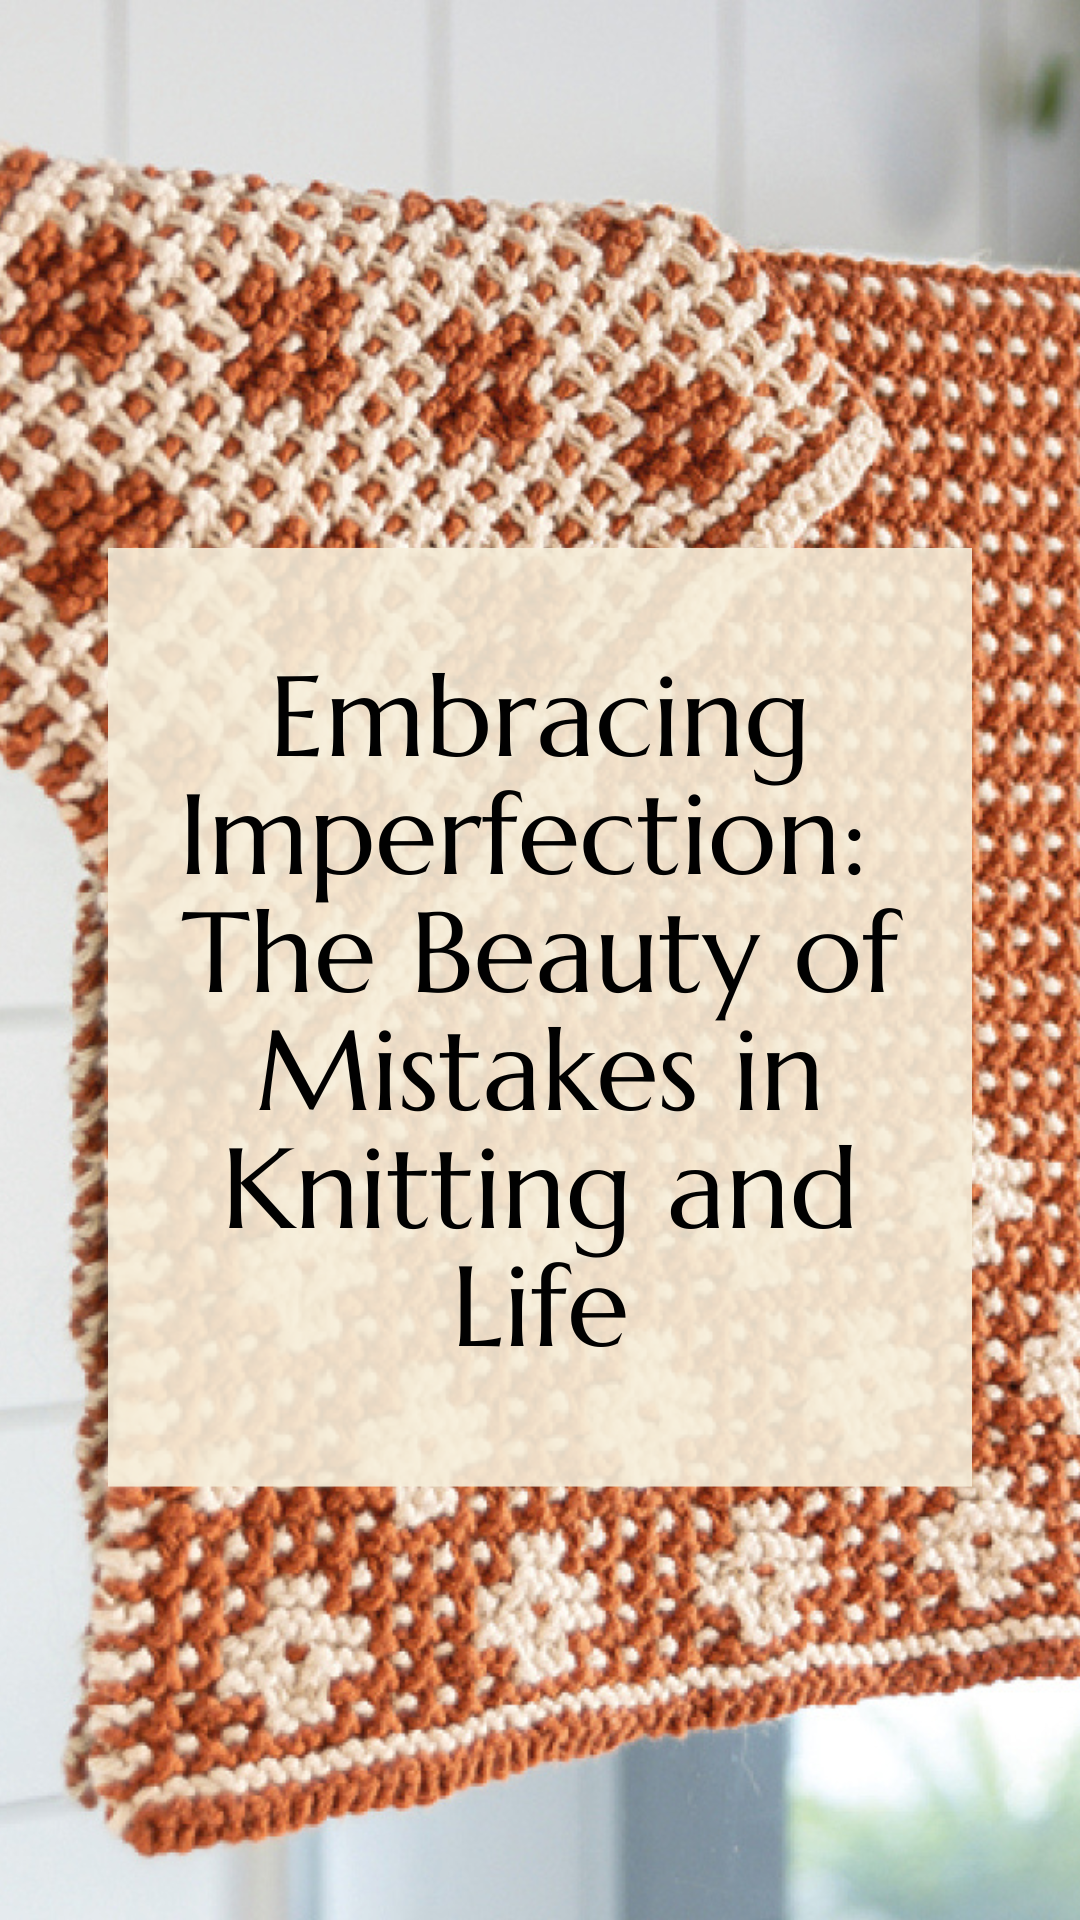 Embracing Imperfection: The Beauty of Mistakes in Knitting and Life